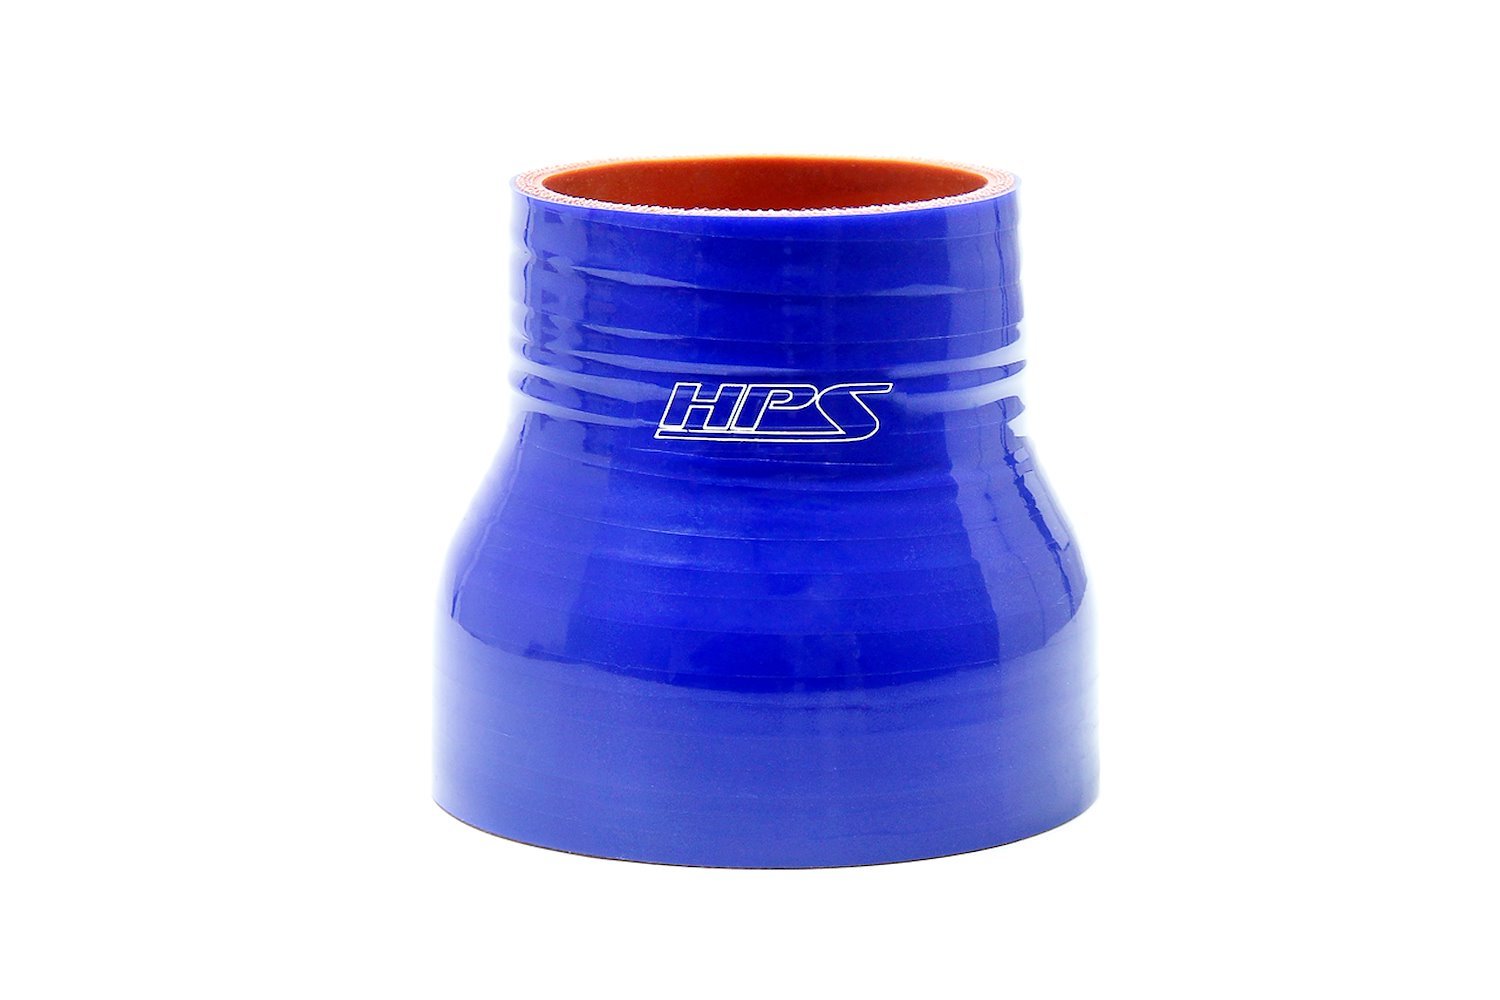 HTSR-200-250-BLUE Silicone Reducer Hose, High-Temp 4-Ply Reinforced, 2 in. - 2-1/2 in. ID, 3 in. Long, Blue